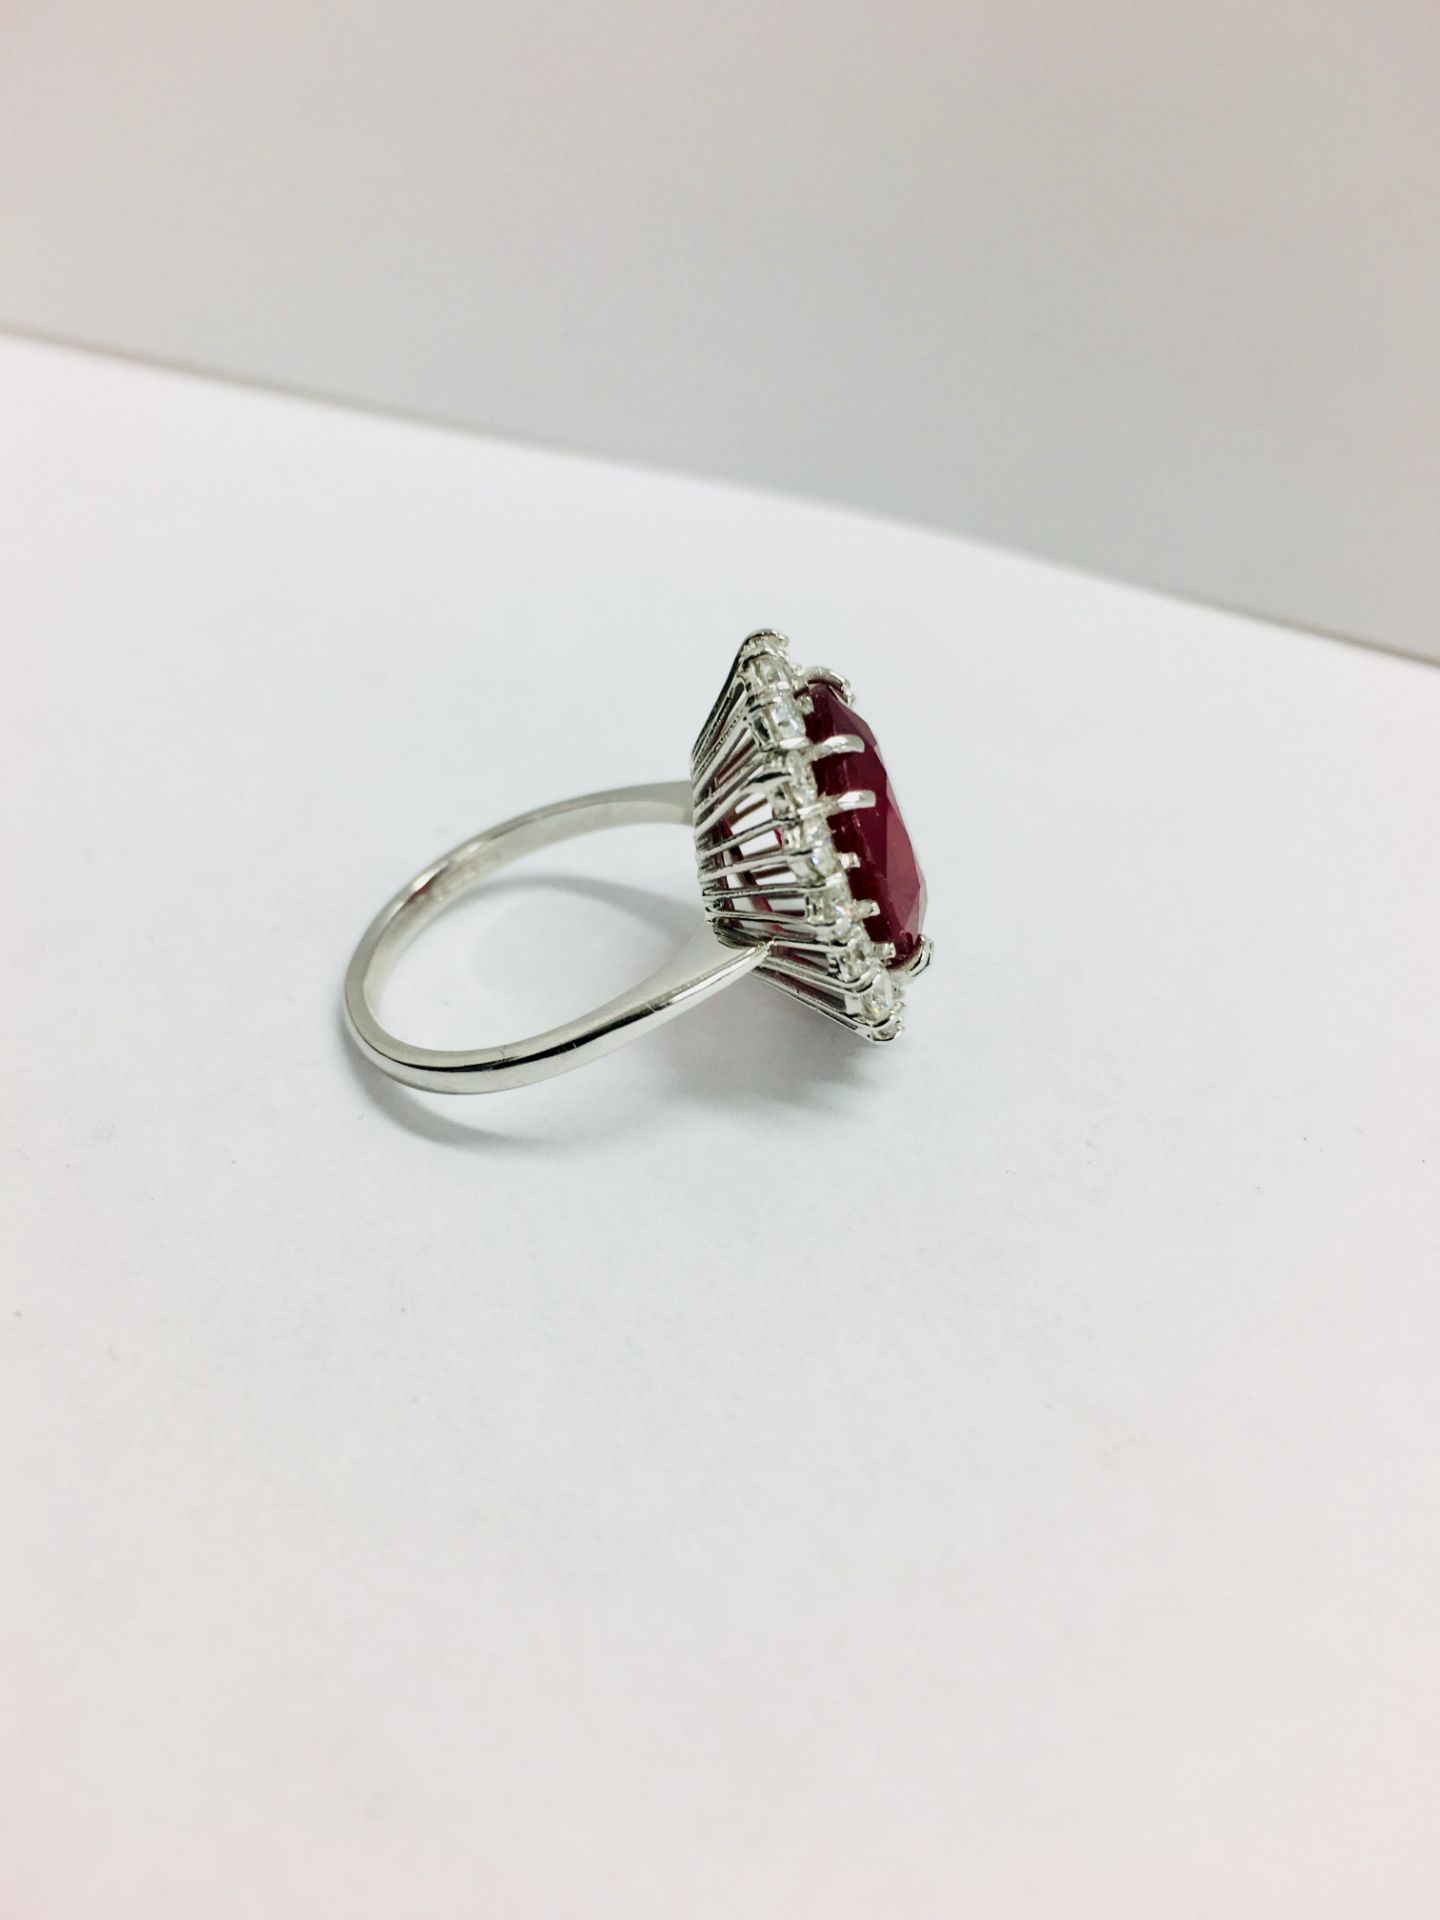 10Ct Ruby And Diamond Cluster Ring. - Image 5 of 11